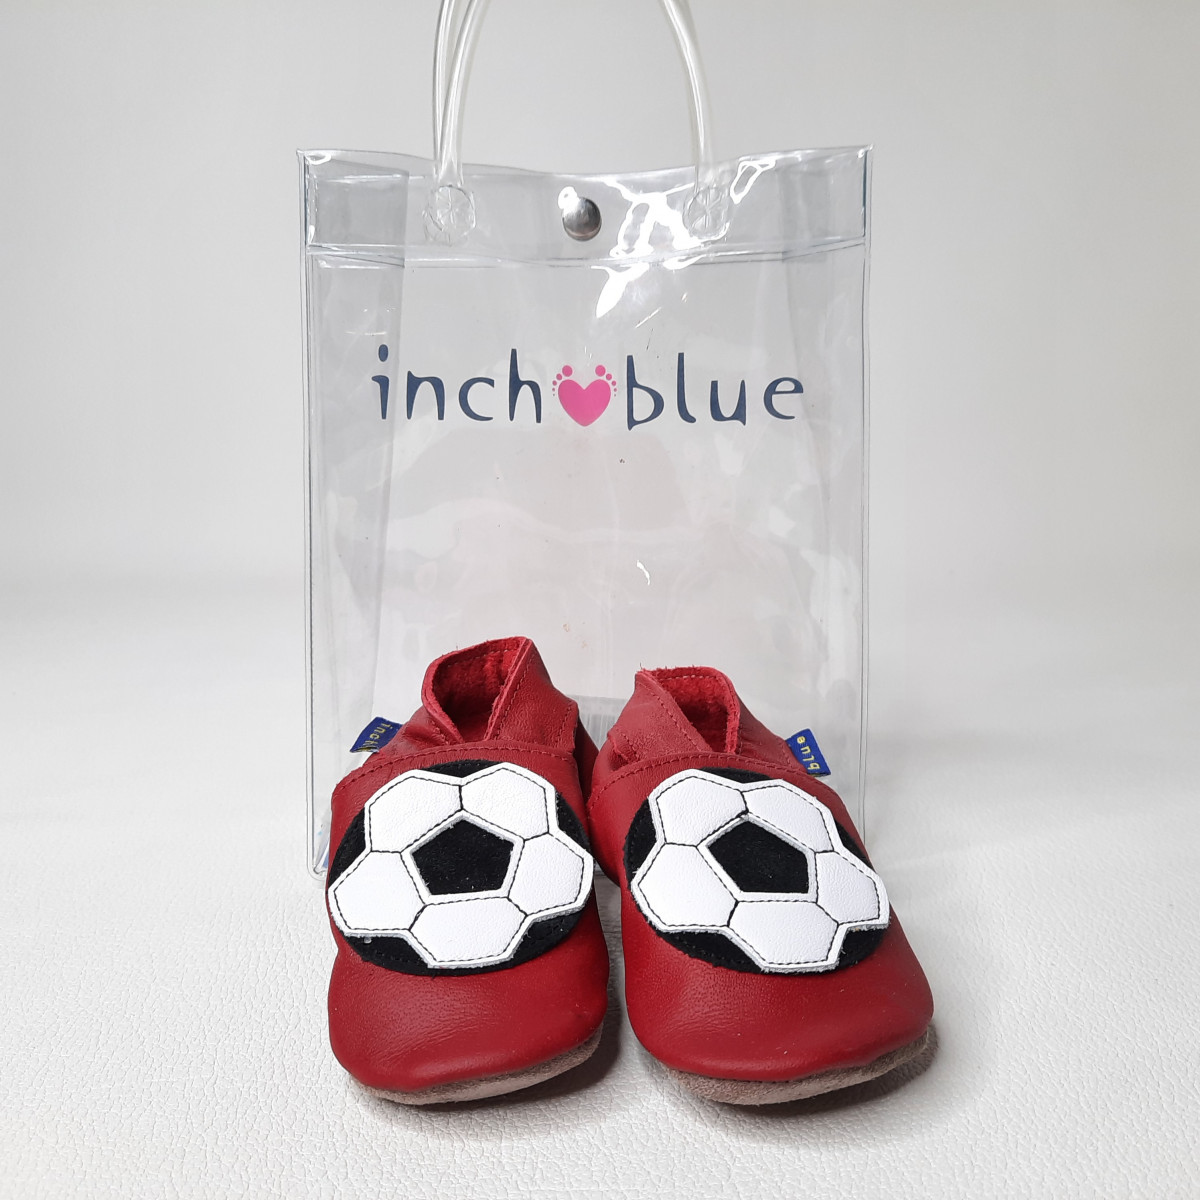 Chaussons en cuir 0-6 mois - Football red - photo 7